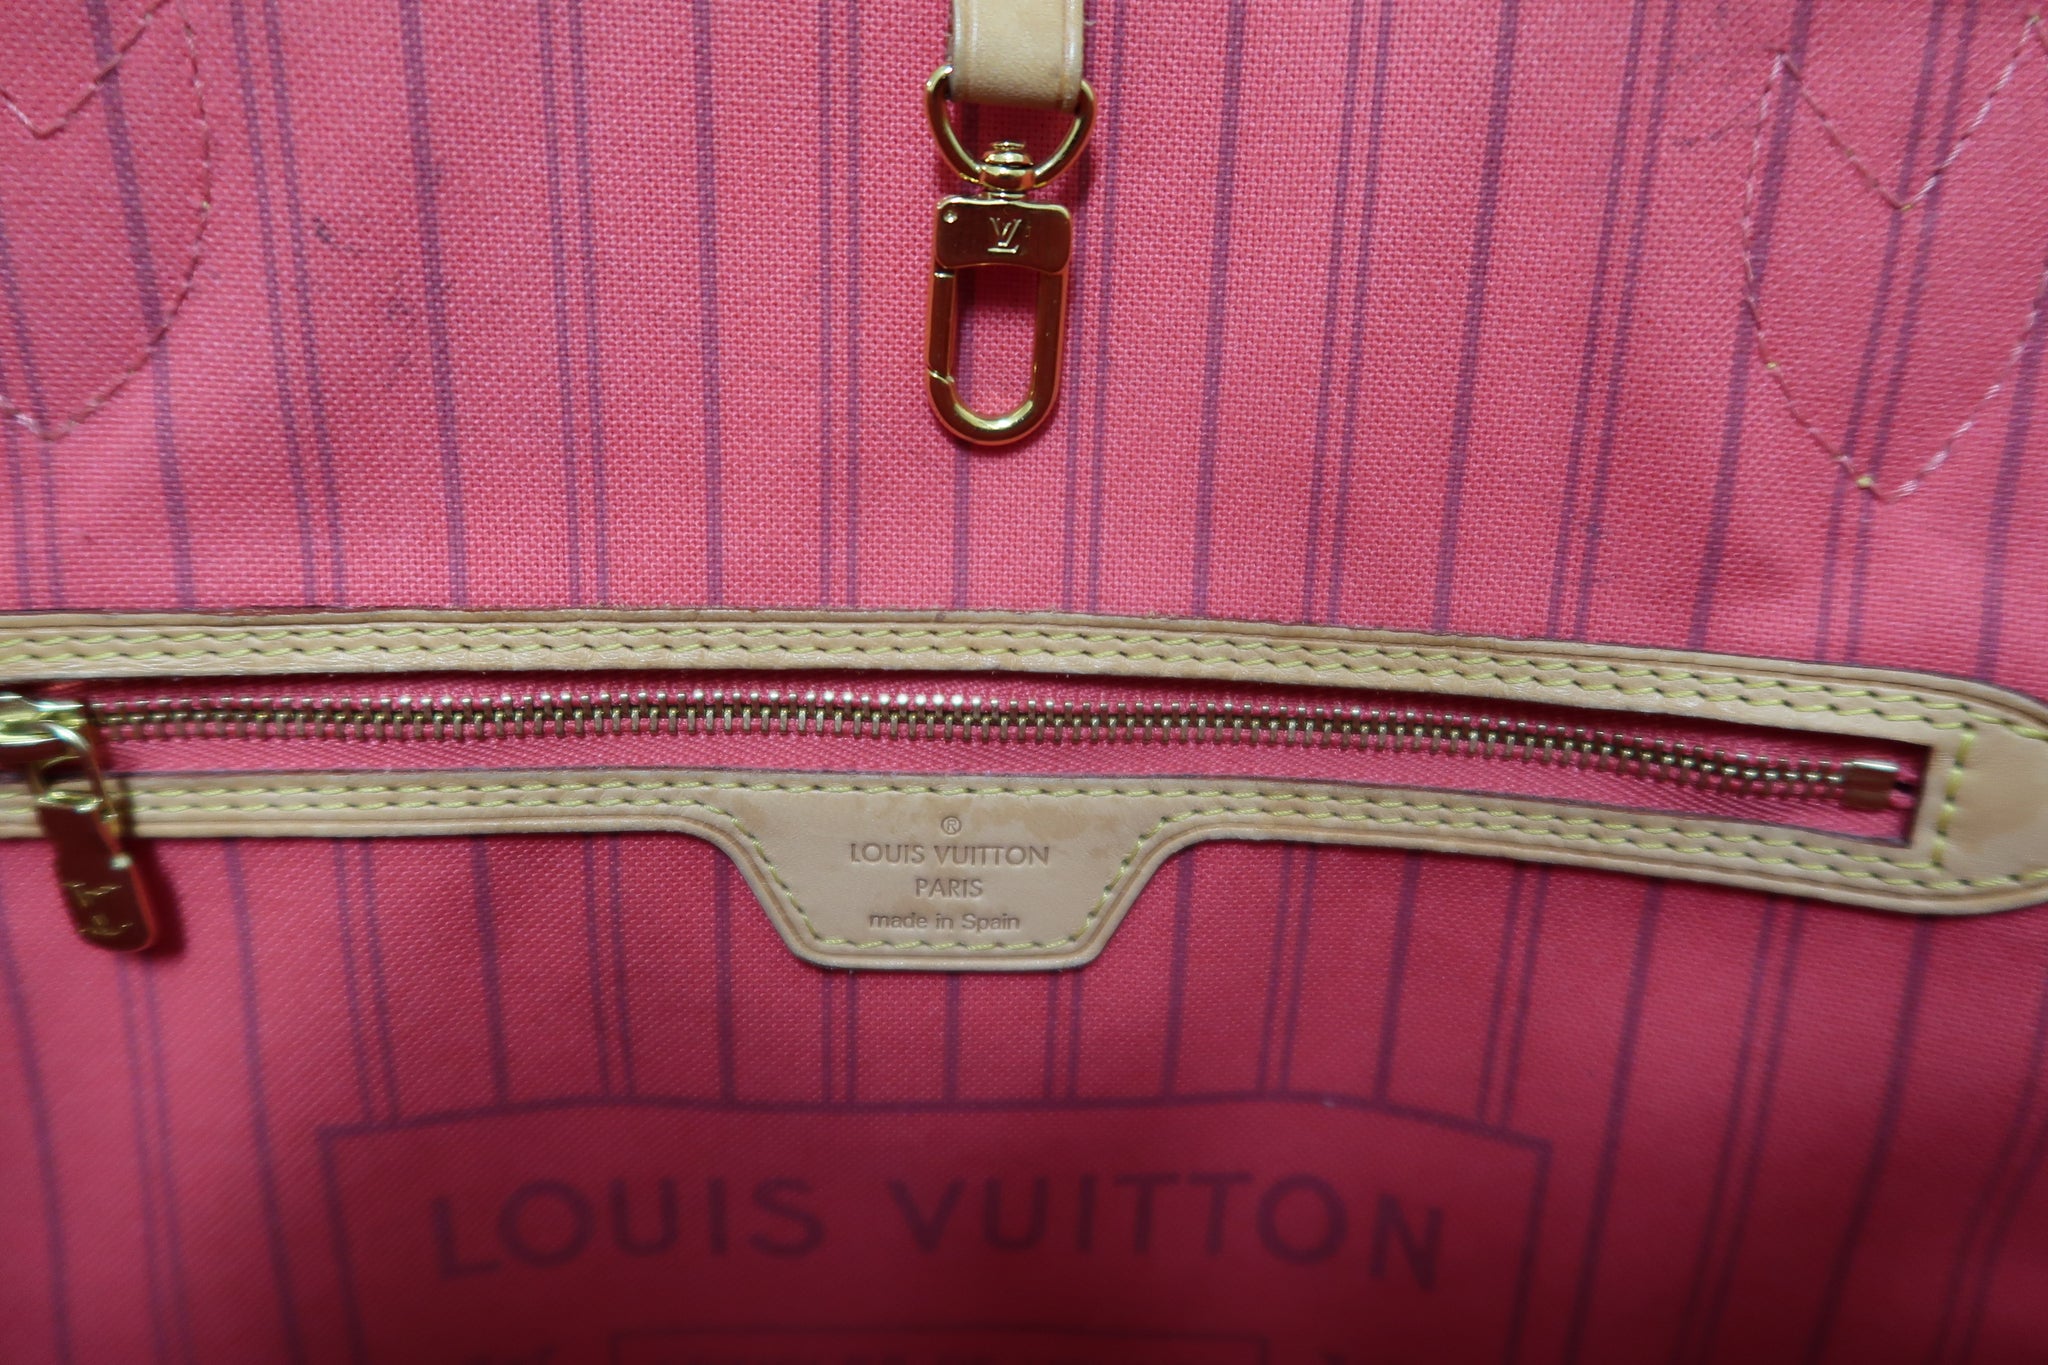 Louis Vuitton Neverfull MM Teddy, Limited Edition, M56960, NEW!